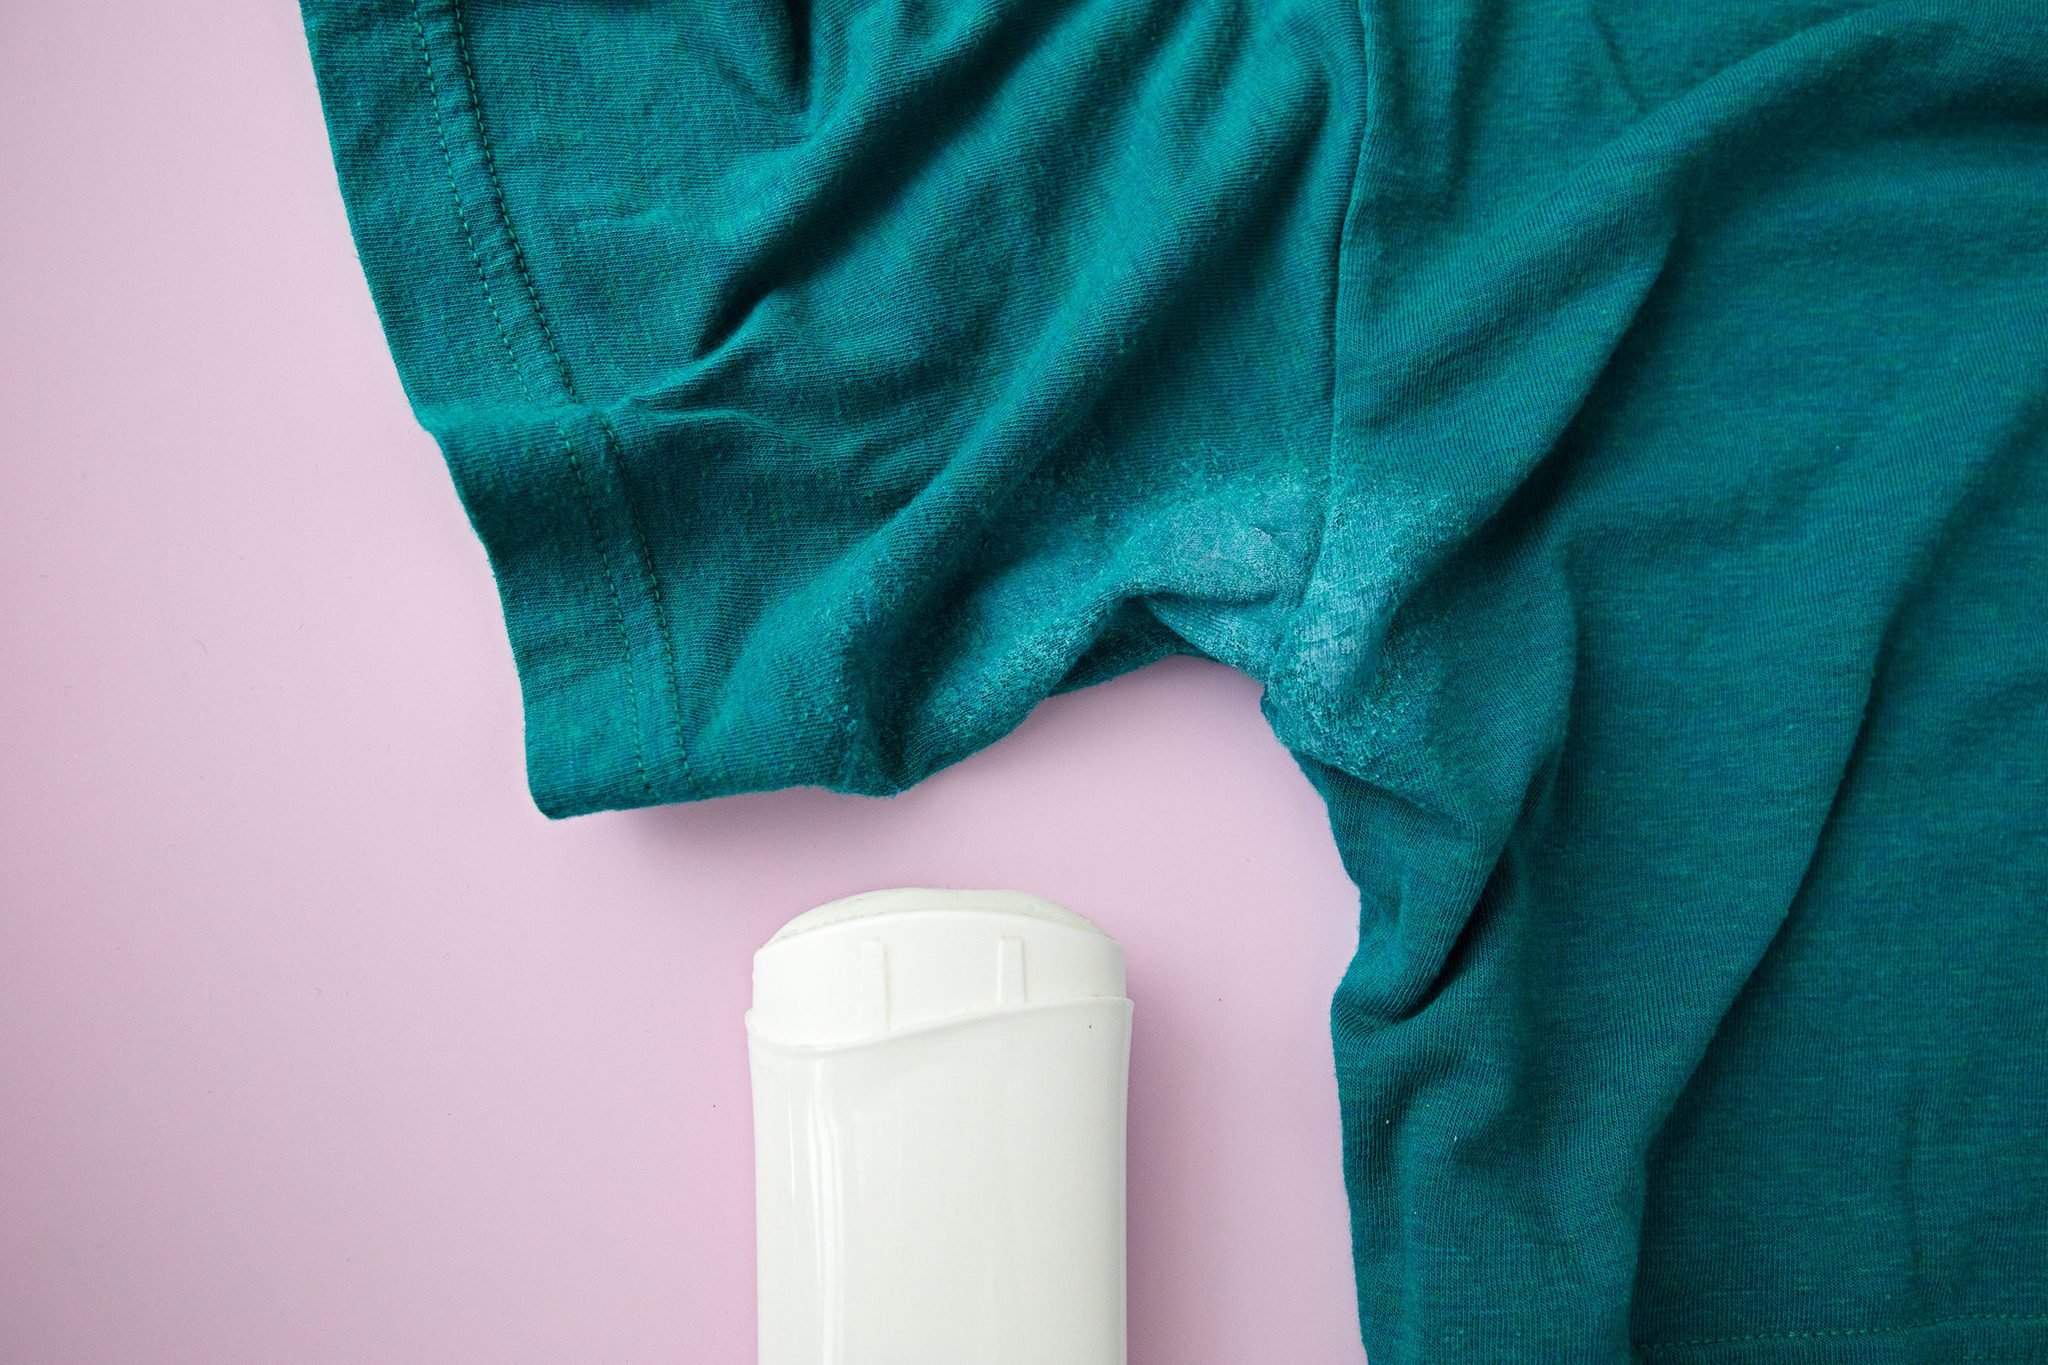 How to Get Deodorant Stains Out of Shirts — Remove